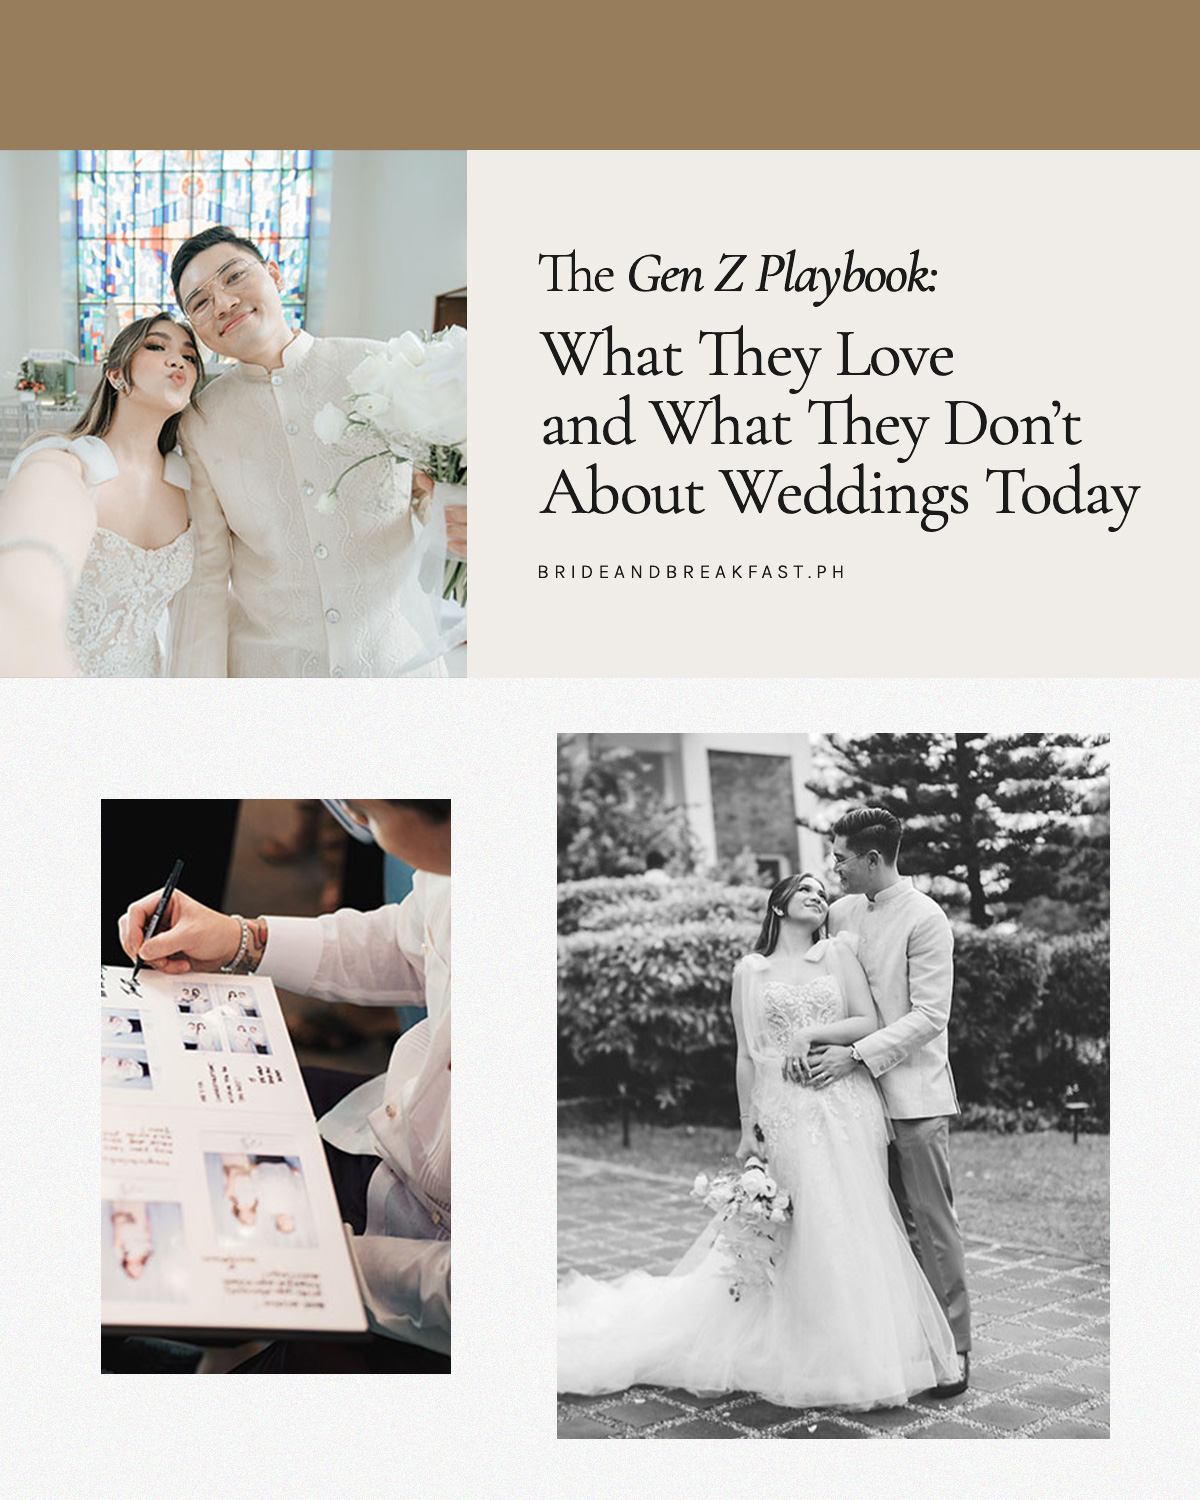 The Gen Z Playbook: What They Love and What They Don't About Weddings Today